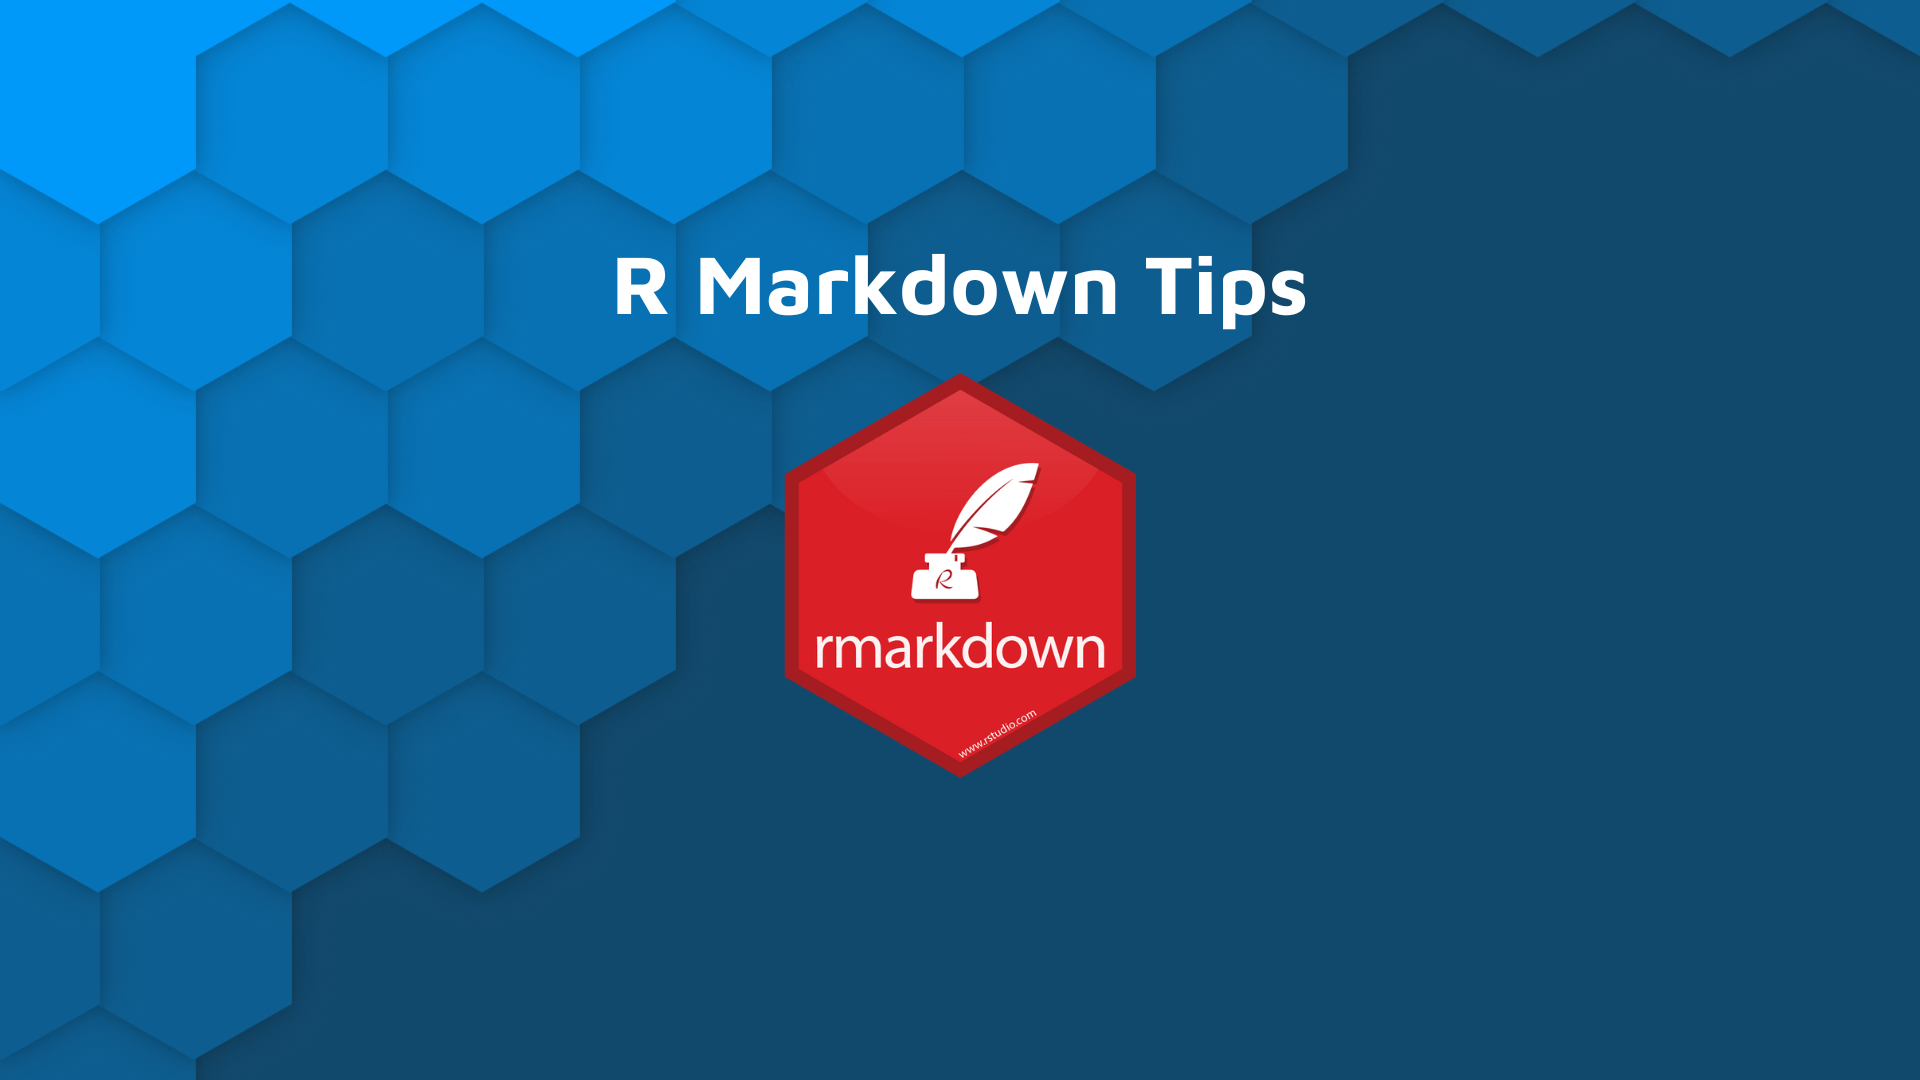 create a table in r markdown